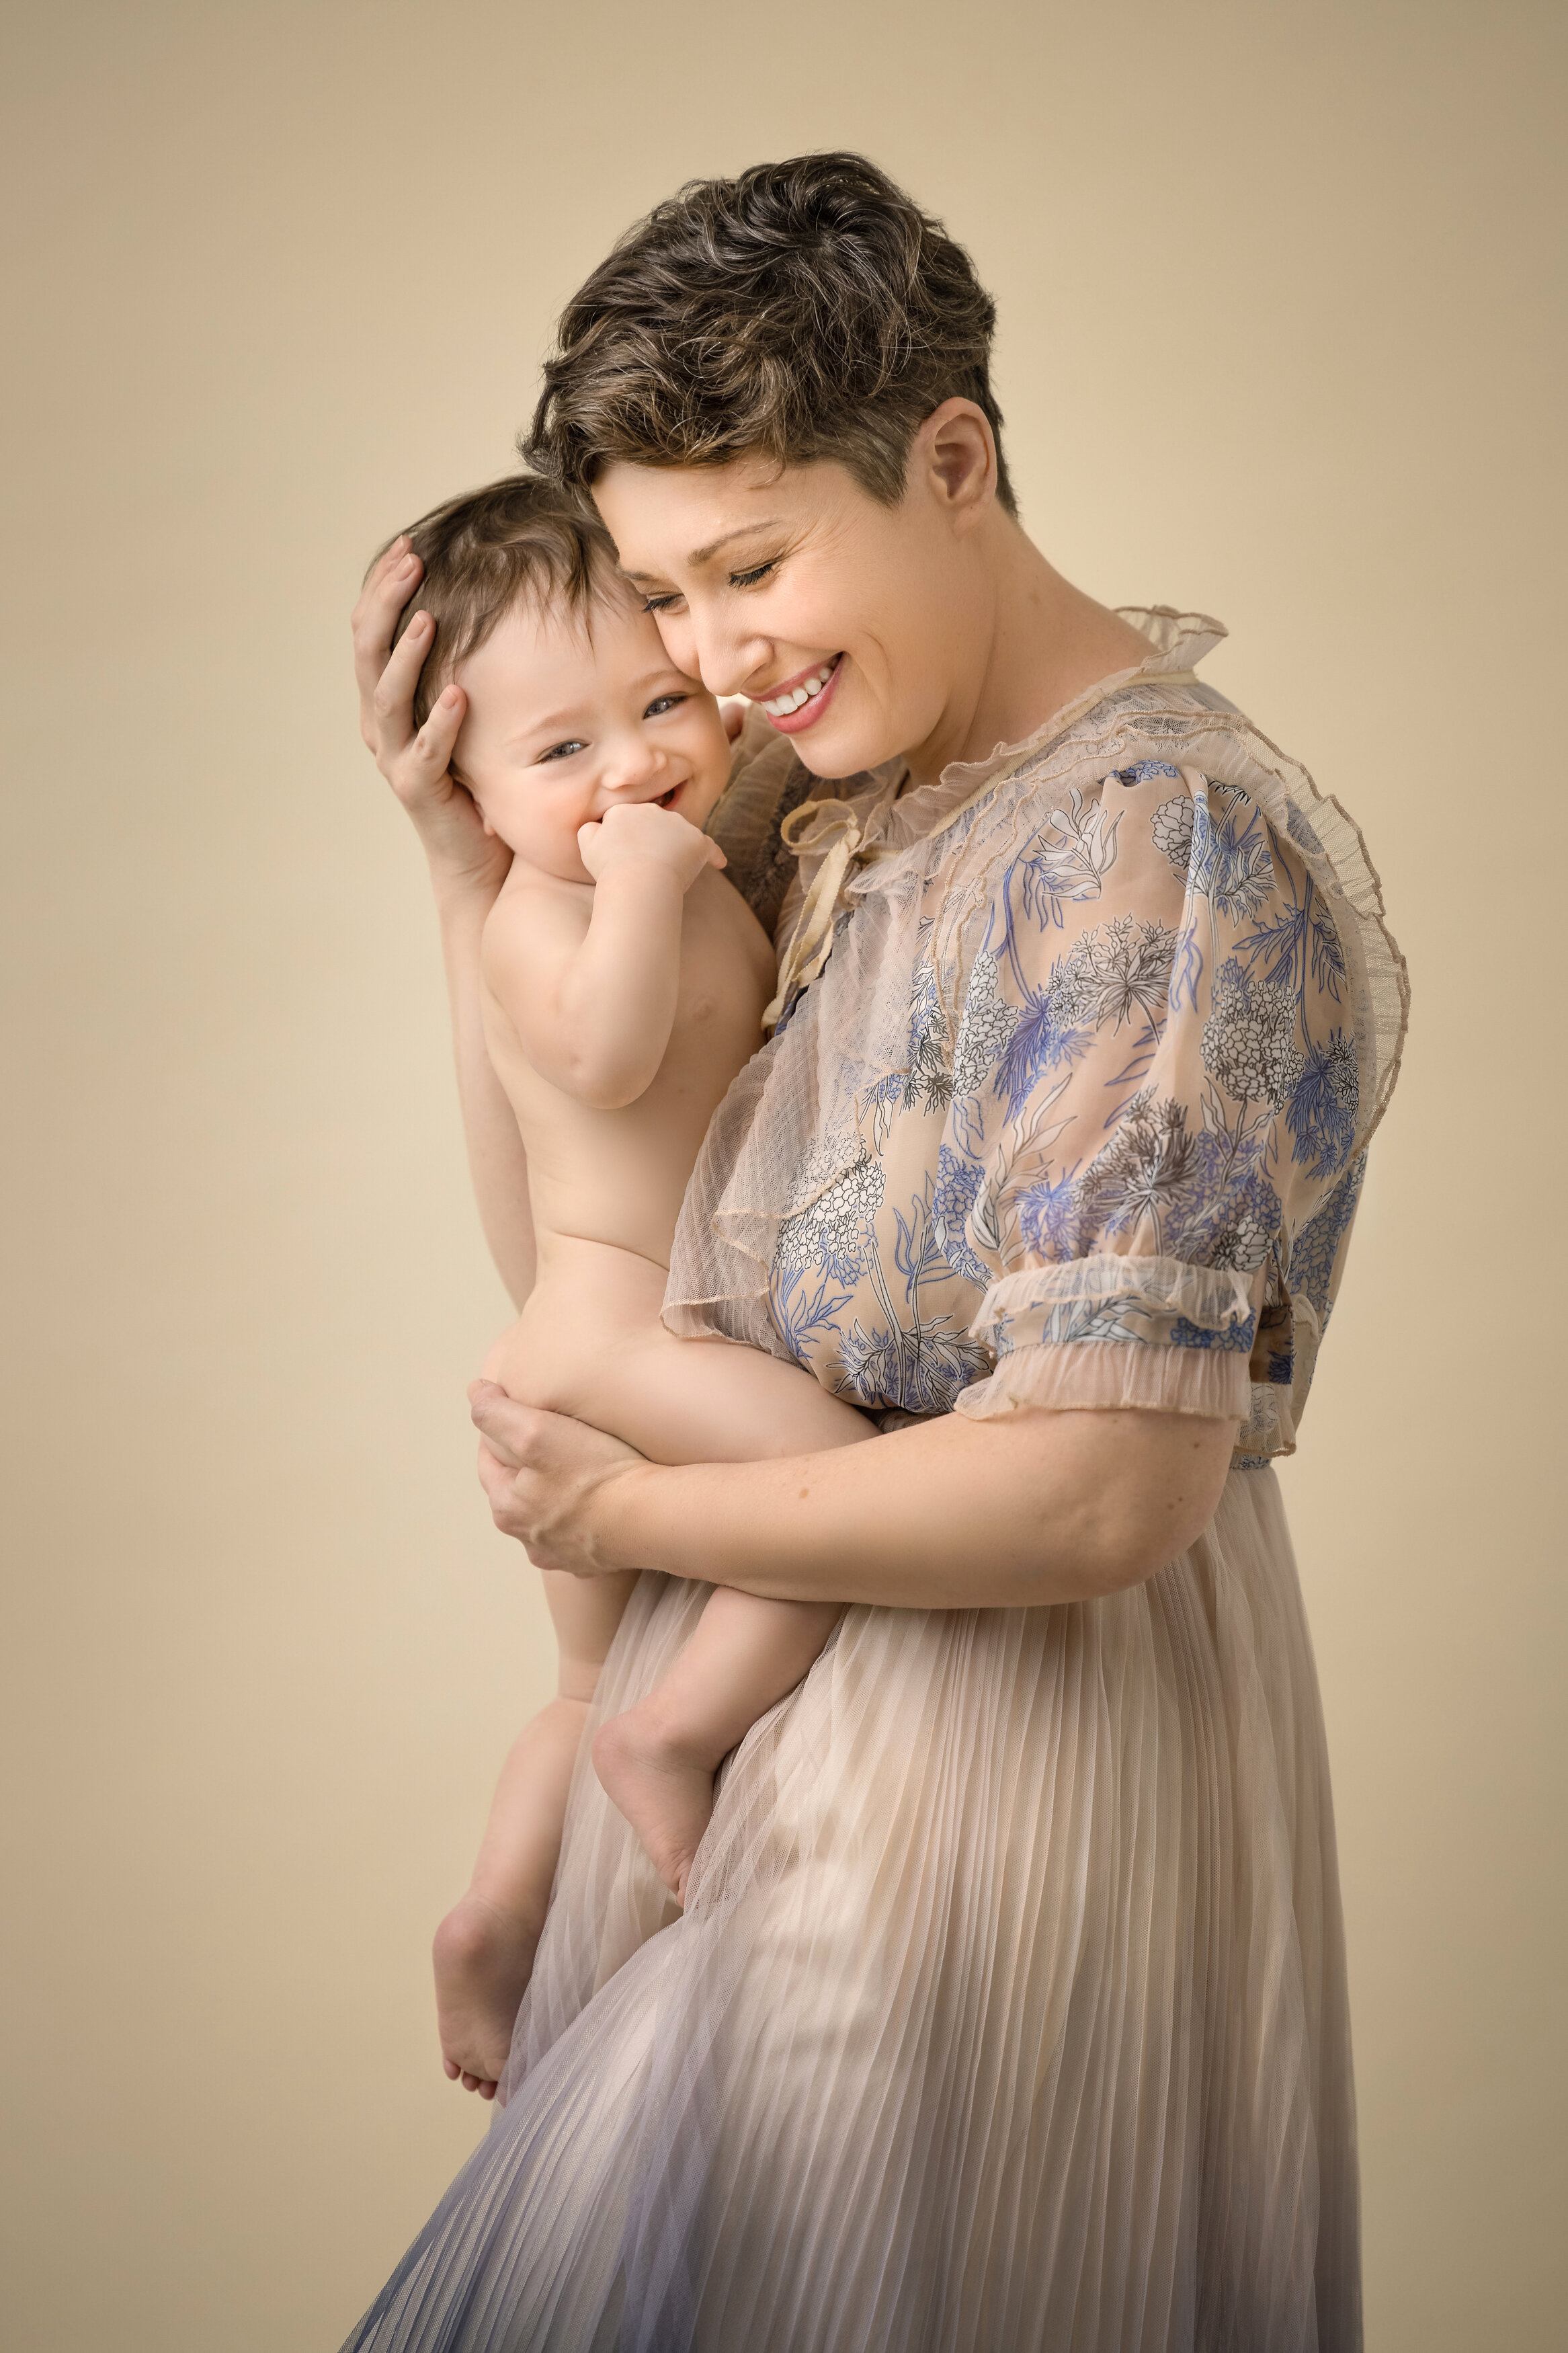 mom holds her child during a family portrait session  in NJ photo studio.